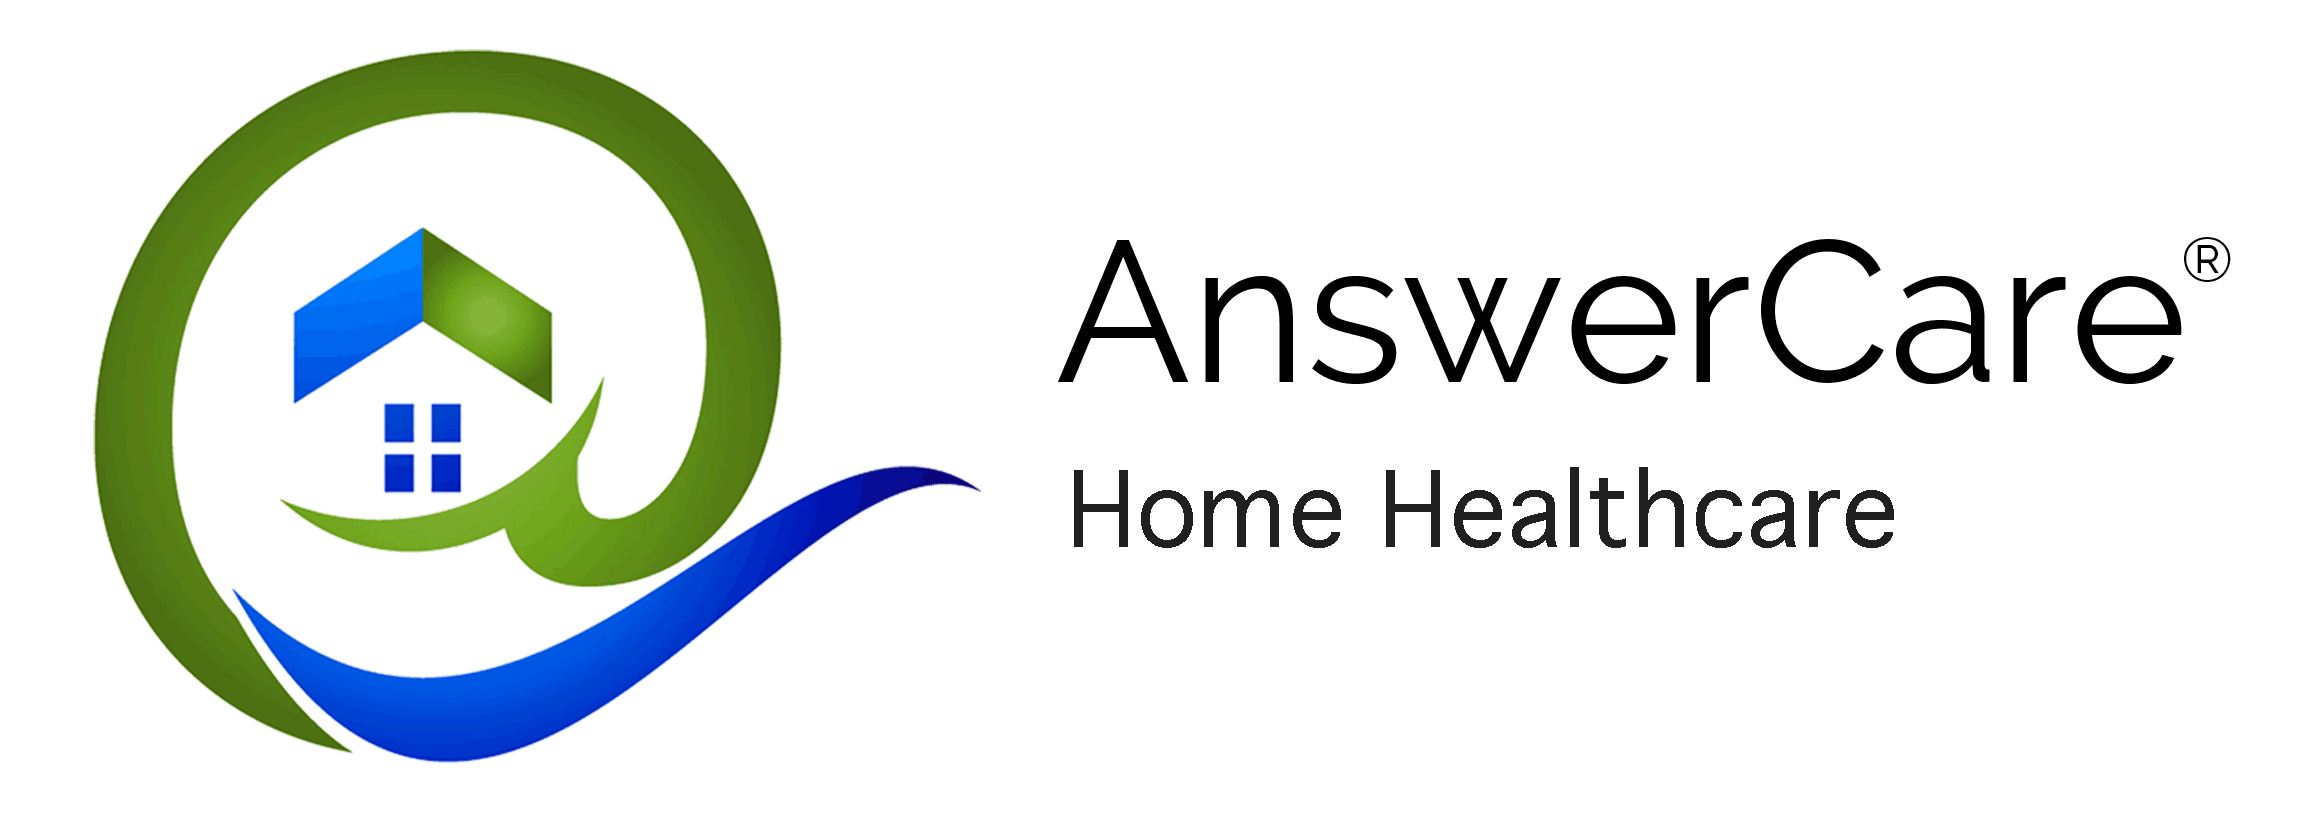 AnswerCare image